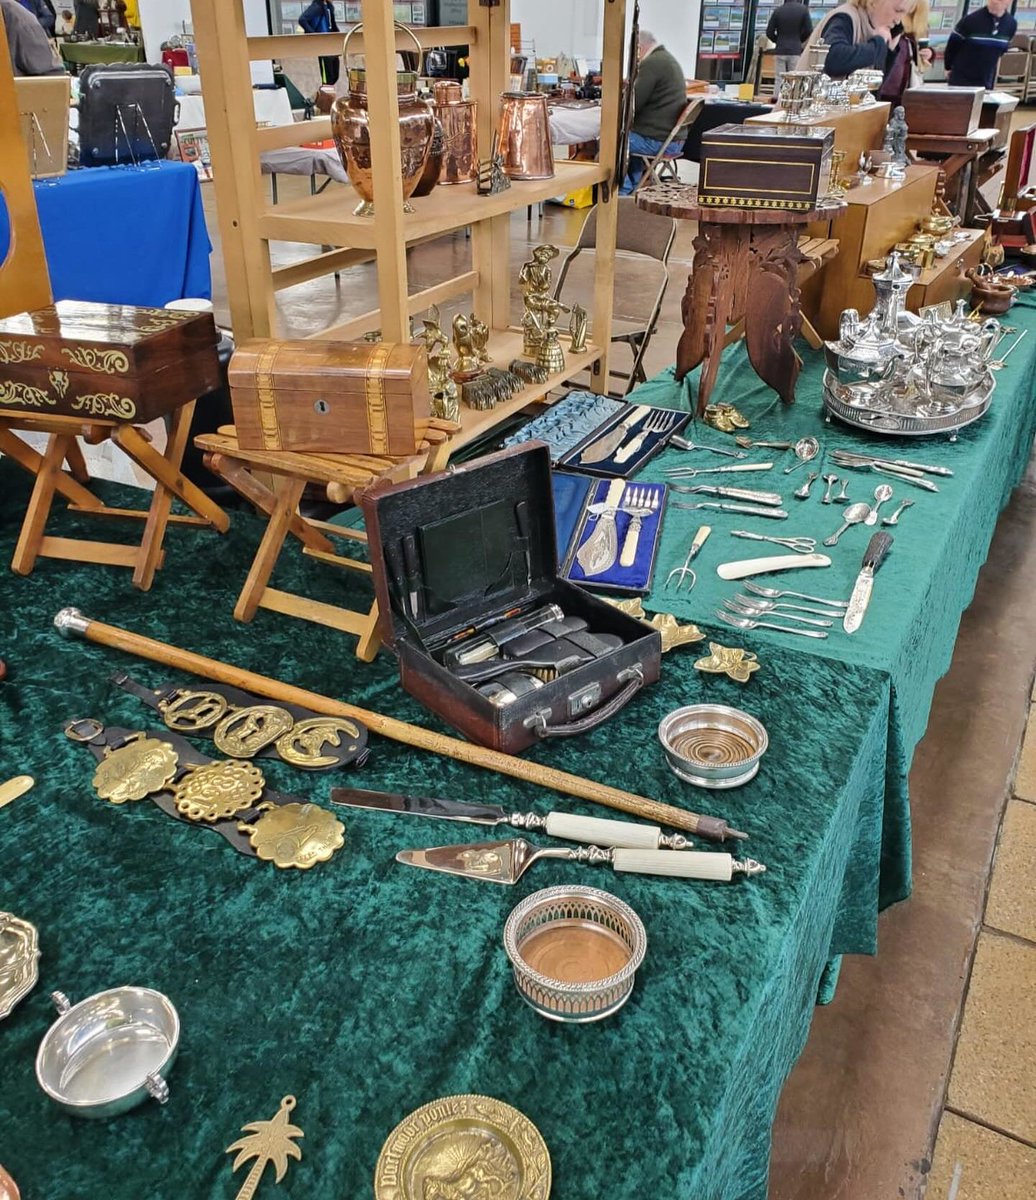 If you missed the antiques fair and flea market recently, here's a quick reminder that they'll be back at Matford on Saturday 29 June!
⏰7.30am-2pm
💷£3 entry
#events #exeter #whatsonexeter #matfordevents #carshow #carbootsale #fleamarket #antiquesmarket #toyfair #traincollectors